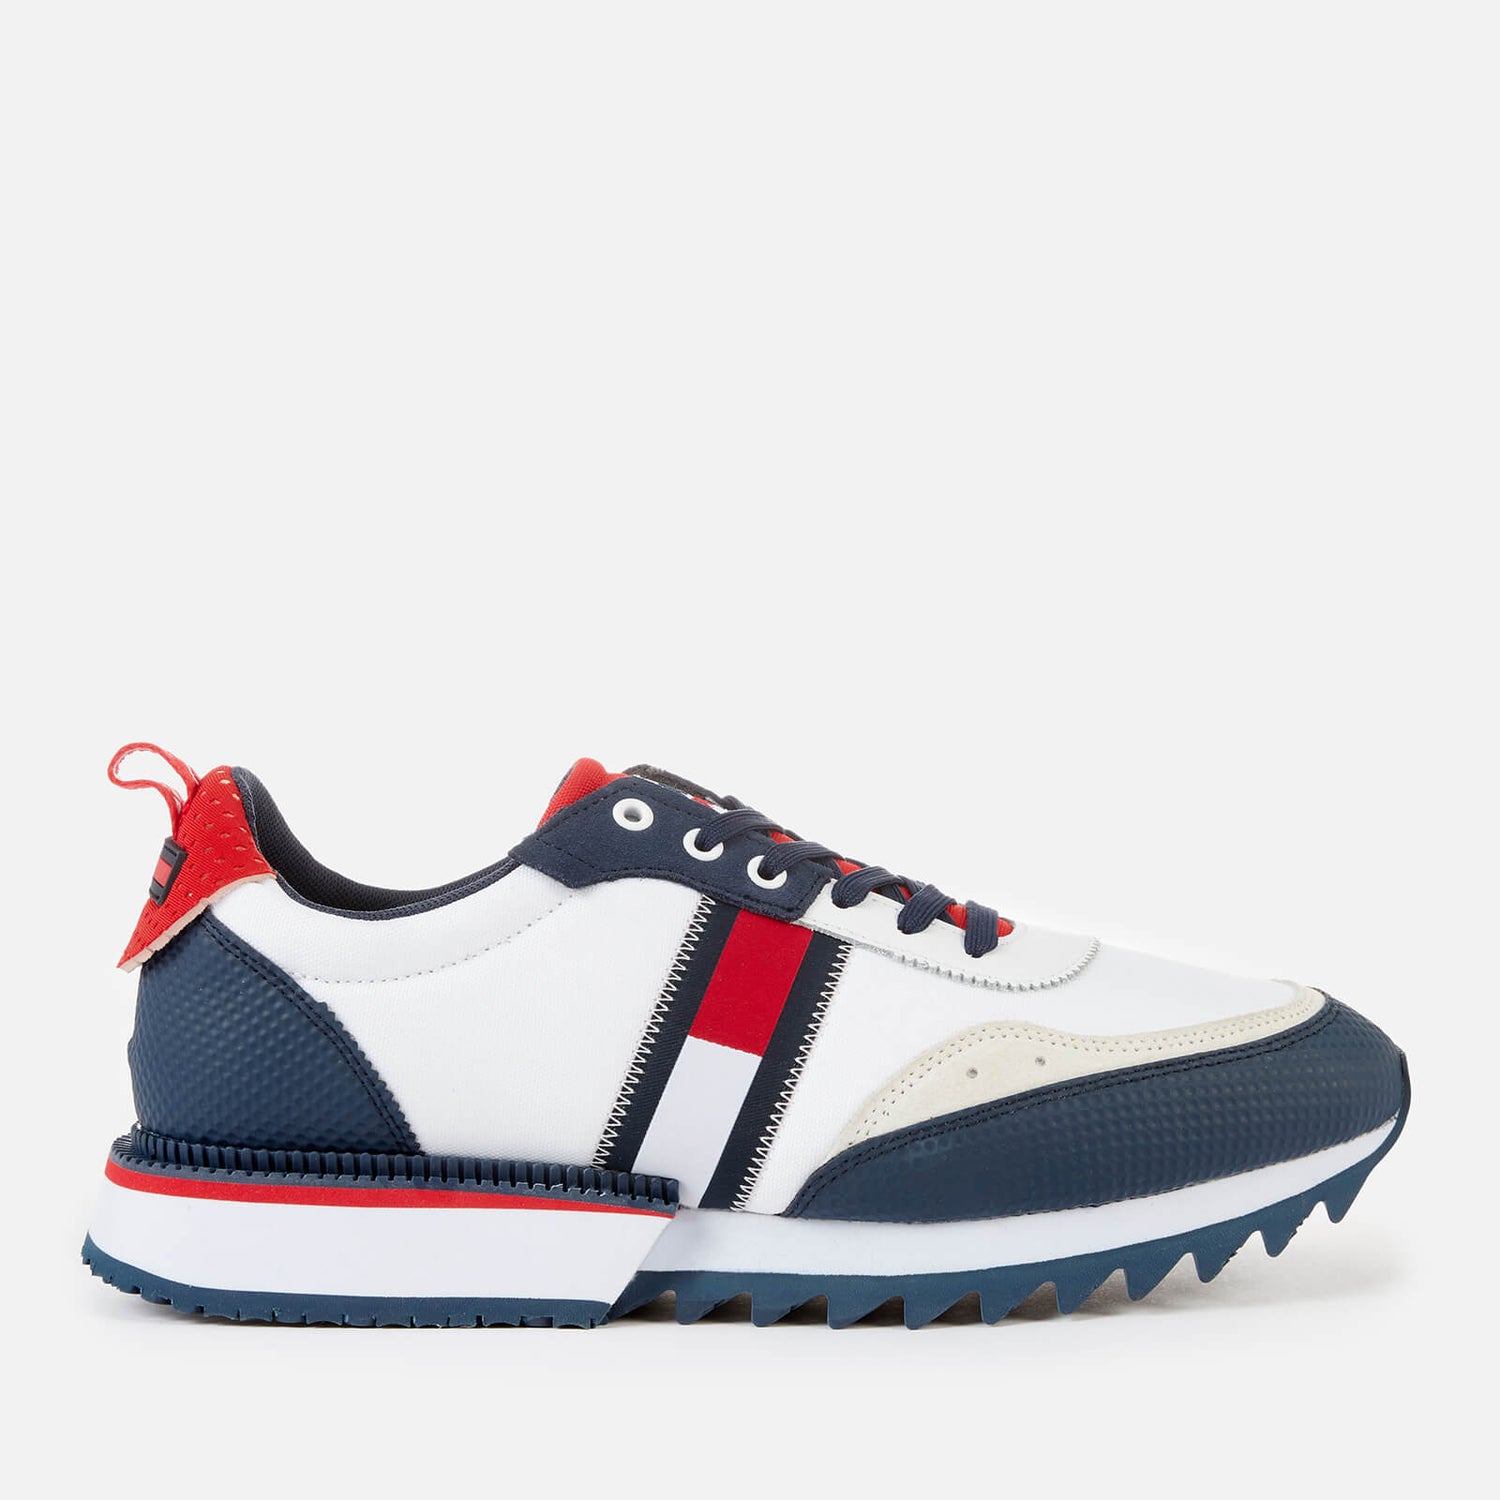 Tommy Jeans Men's Fashion Running Style Trainers - Twilight Navy